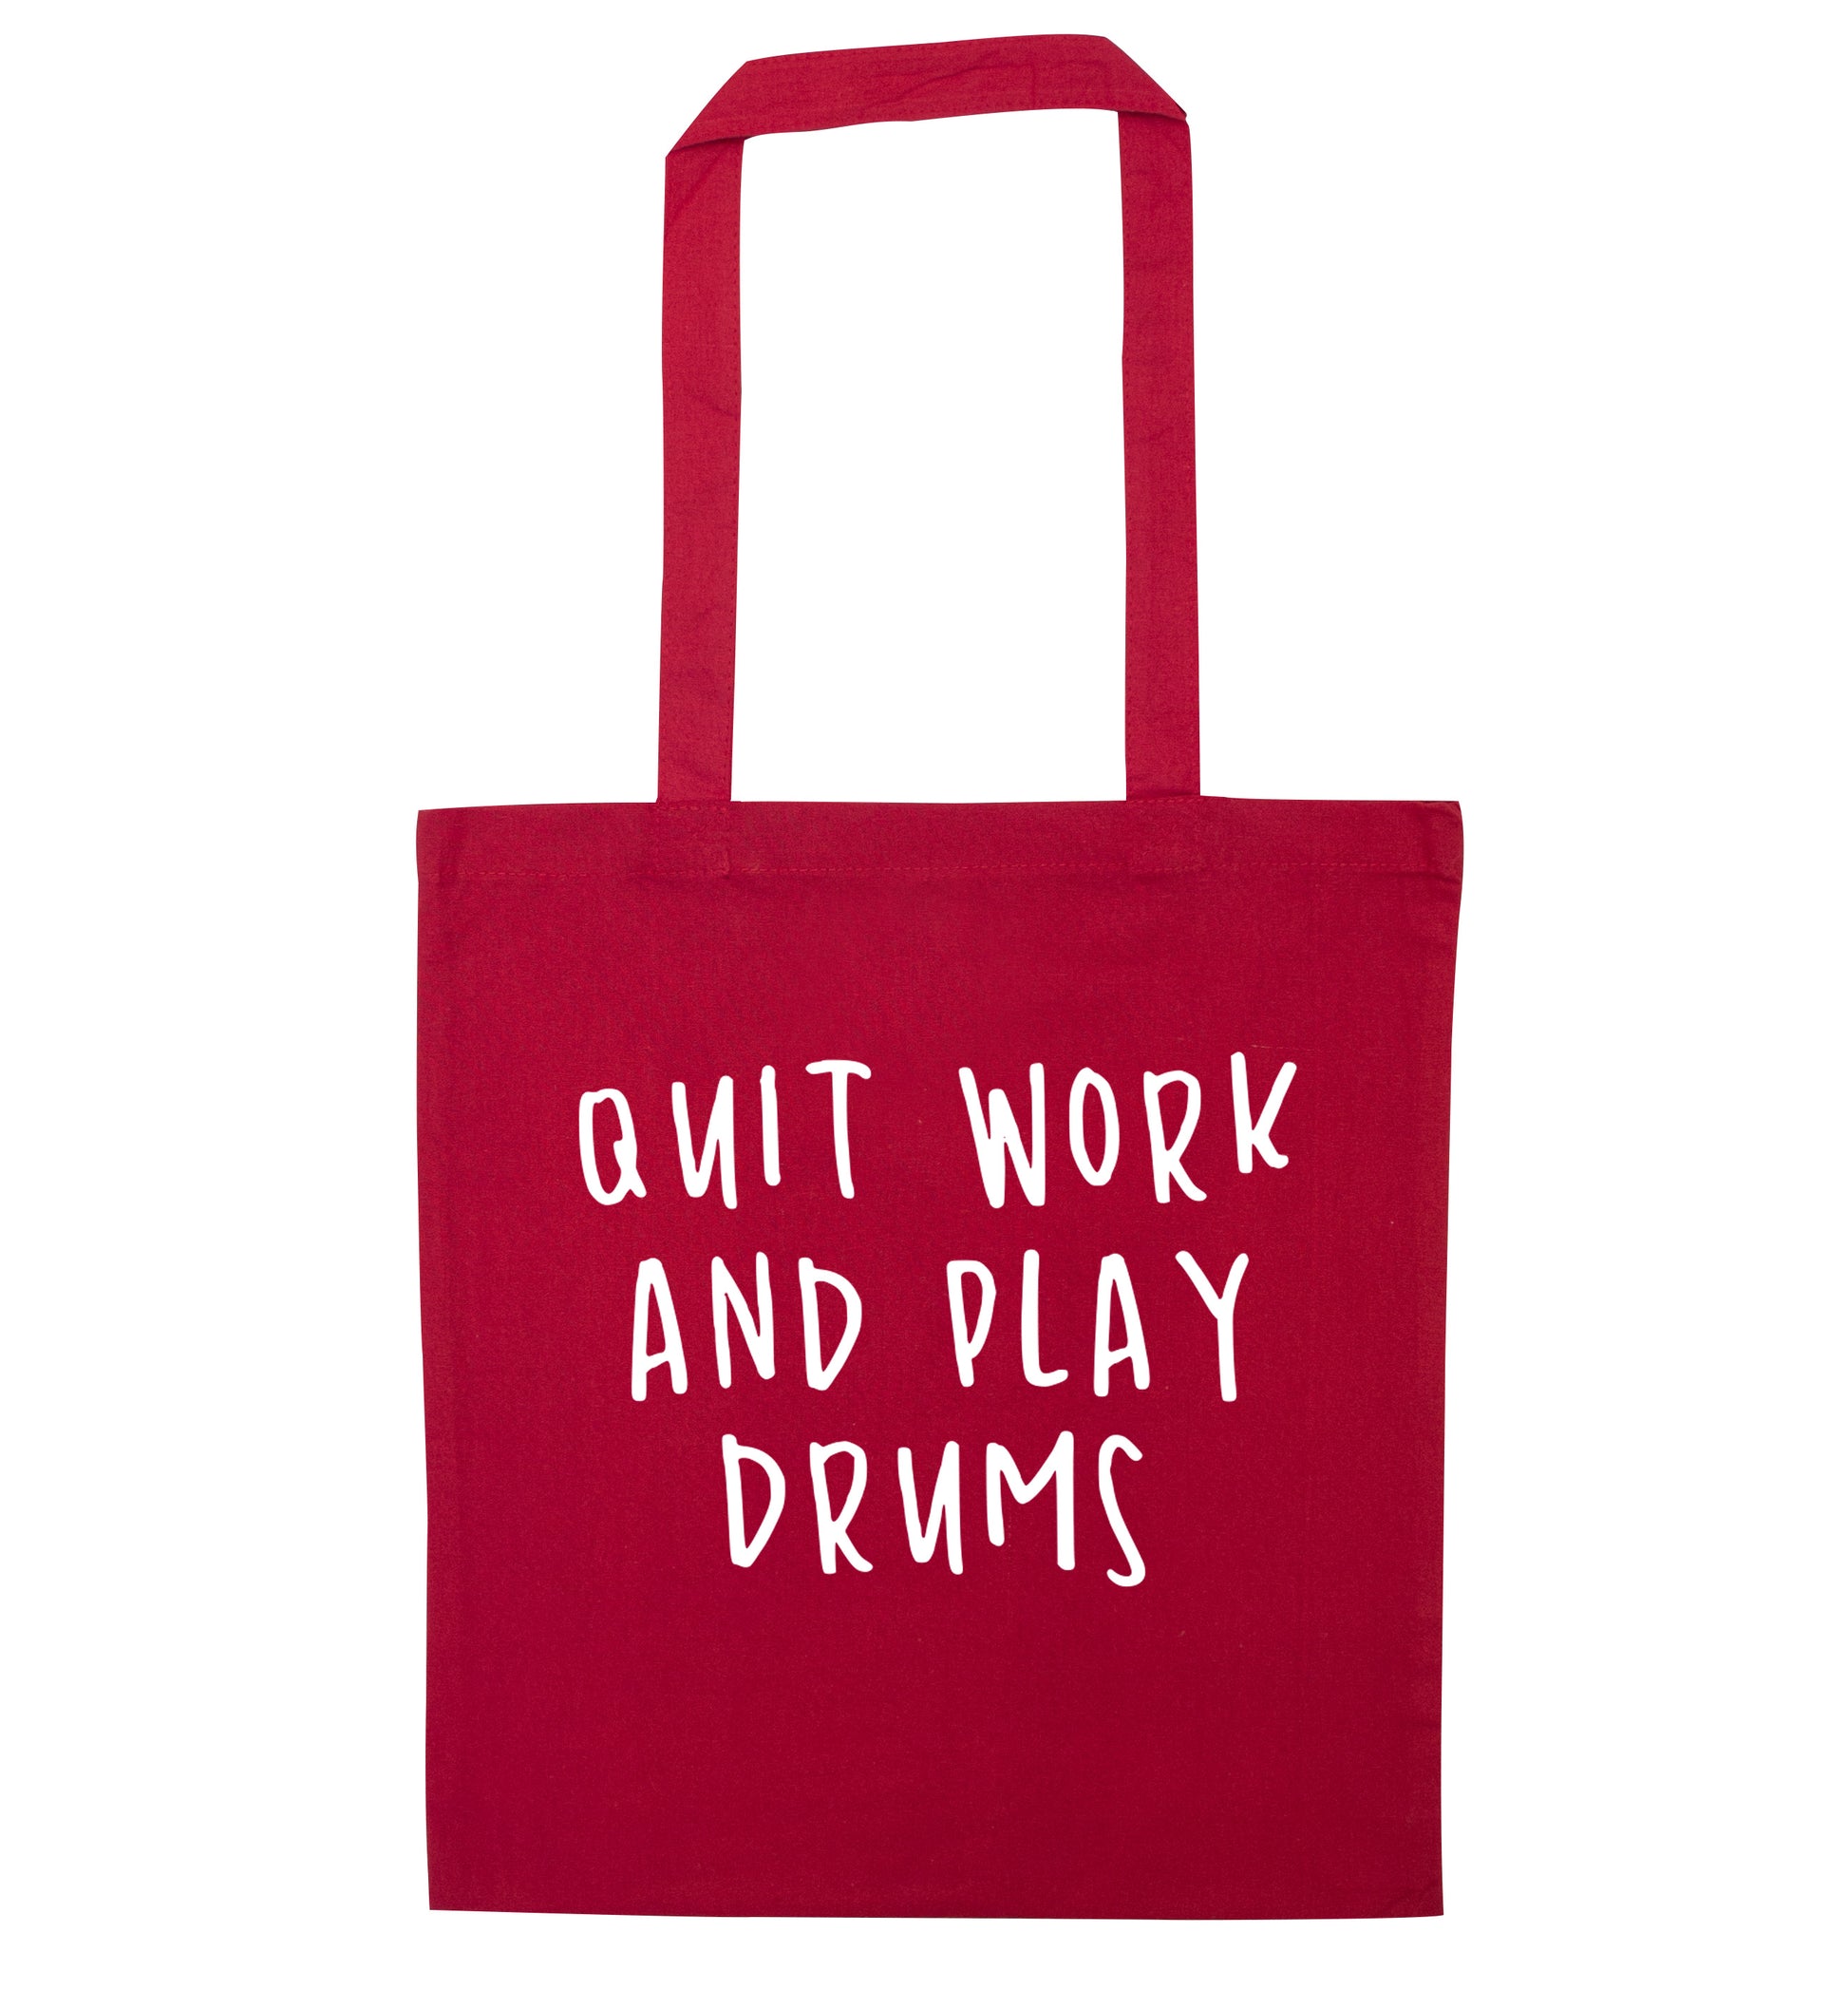 Quit work and play drums red tote bag